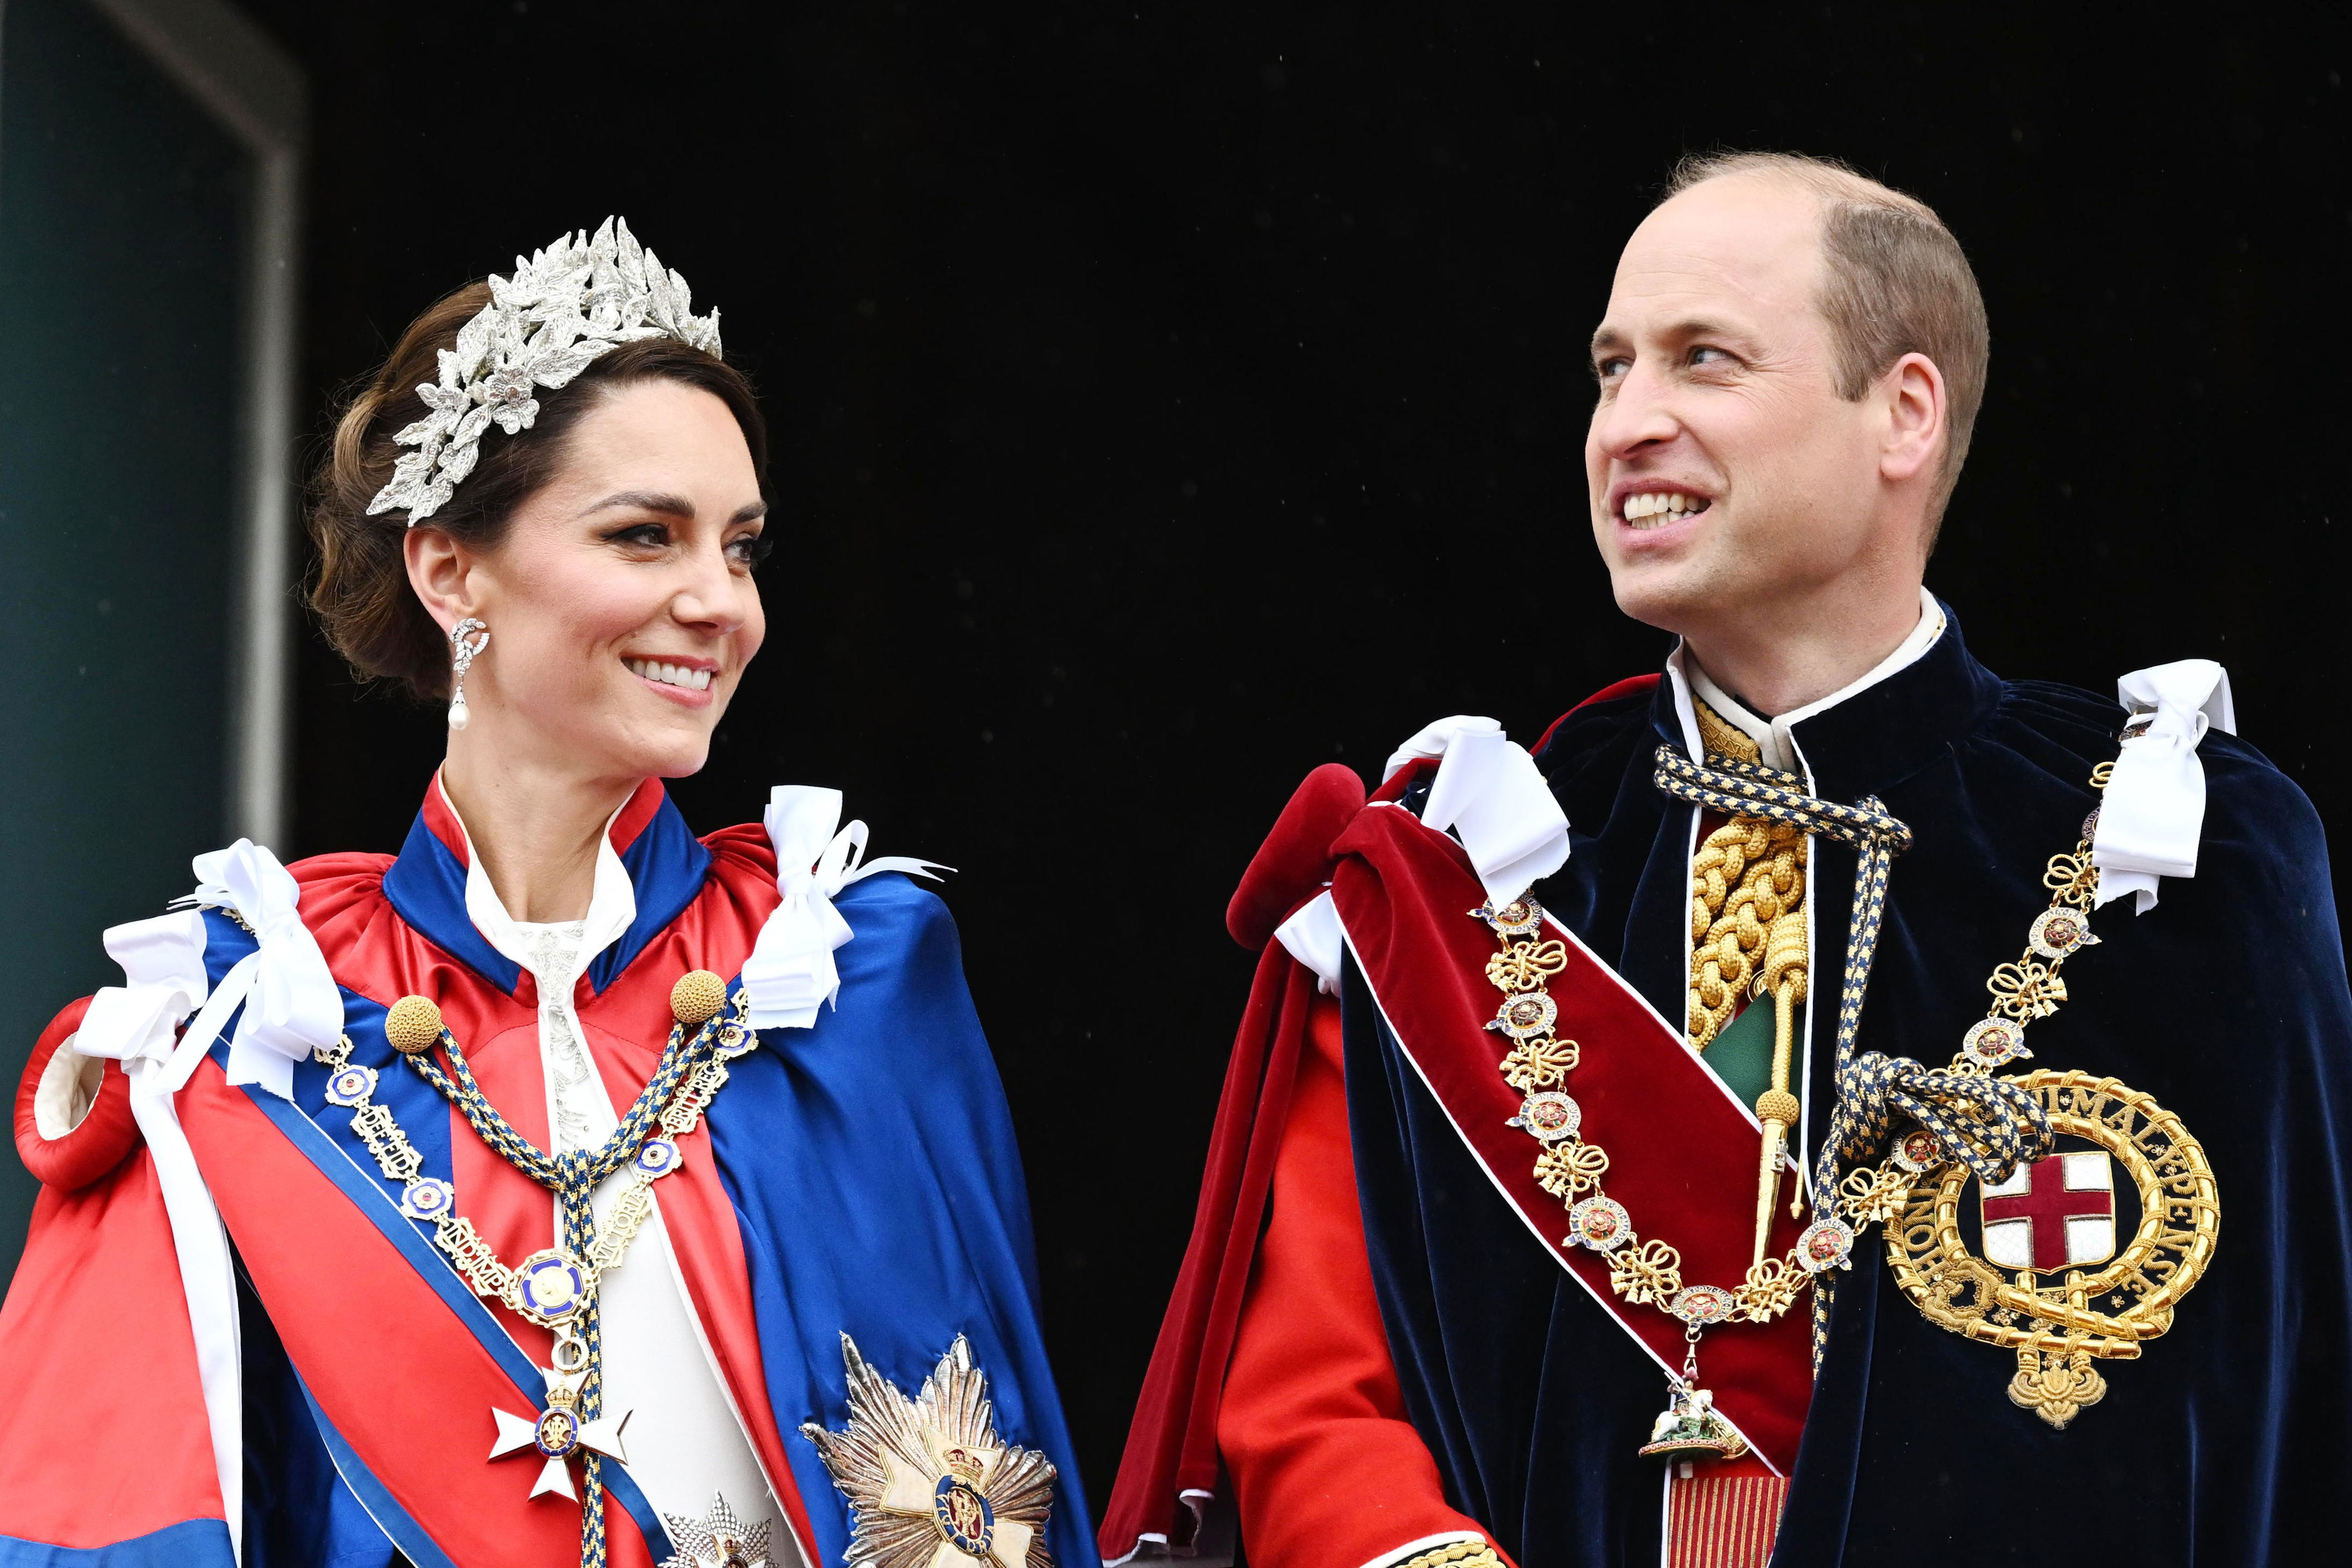 <p>Princess Kate and <a href="https://www.wonderwall.com/celebrity/profiles/overview/prince-william-482.article">Prince William</a> watched the crowds from the balcony of Buckingham Palace in London following the <a href="https://www.wonderwall.com/celebrity/the-coronation-of-king-charles-iii-and-queen-camilla-the-best-pictures-of-all-the-royals-at-this-historic-event-735015.gallery">coronation</a> of King Charles III and Queen Camilla on May 6, 2023.</p>